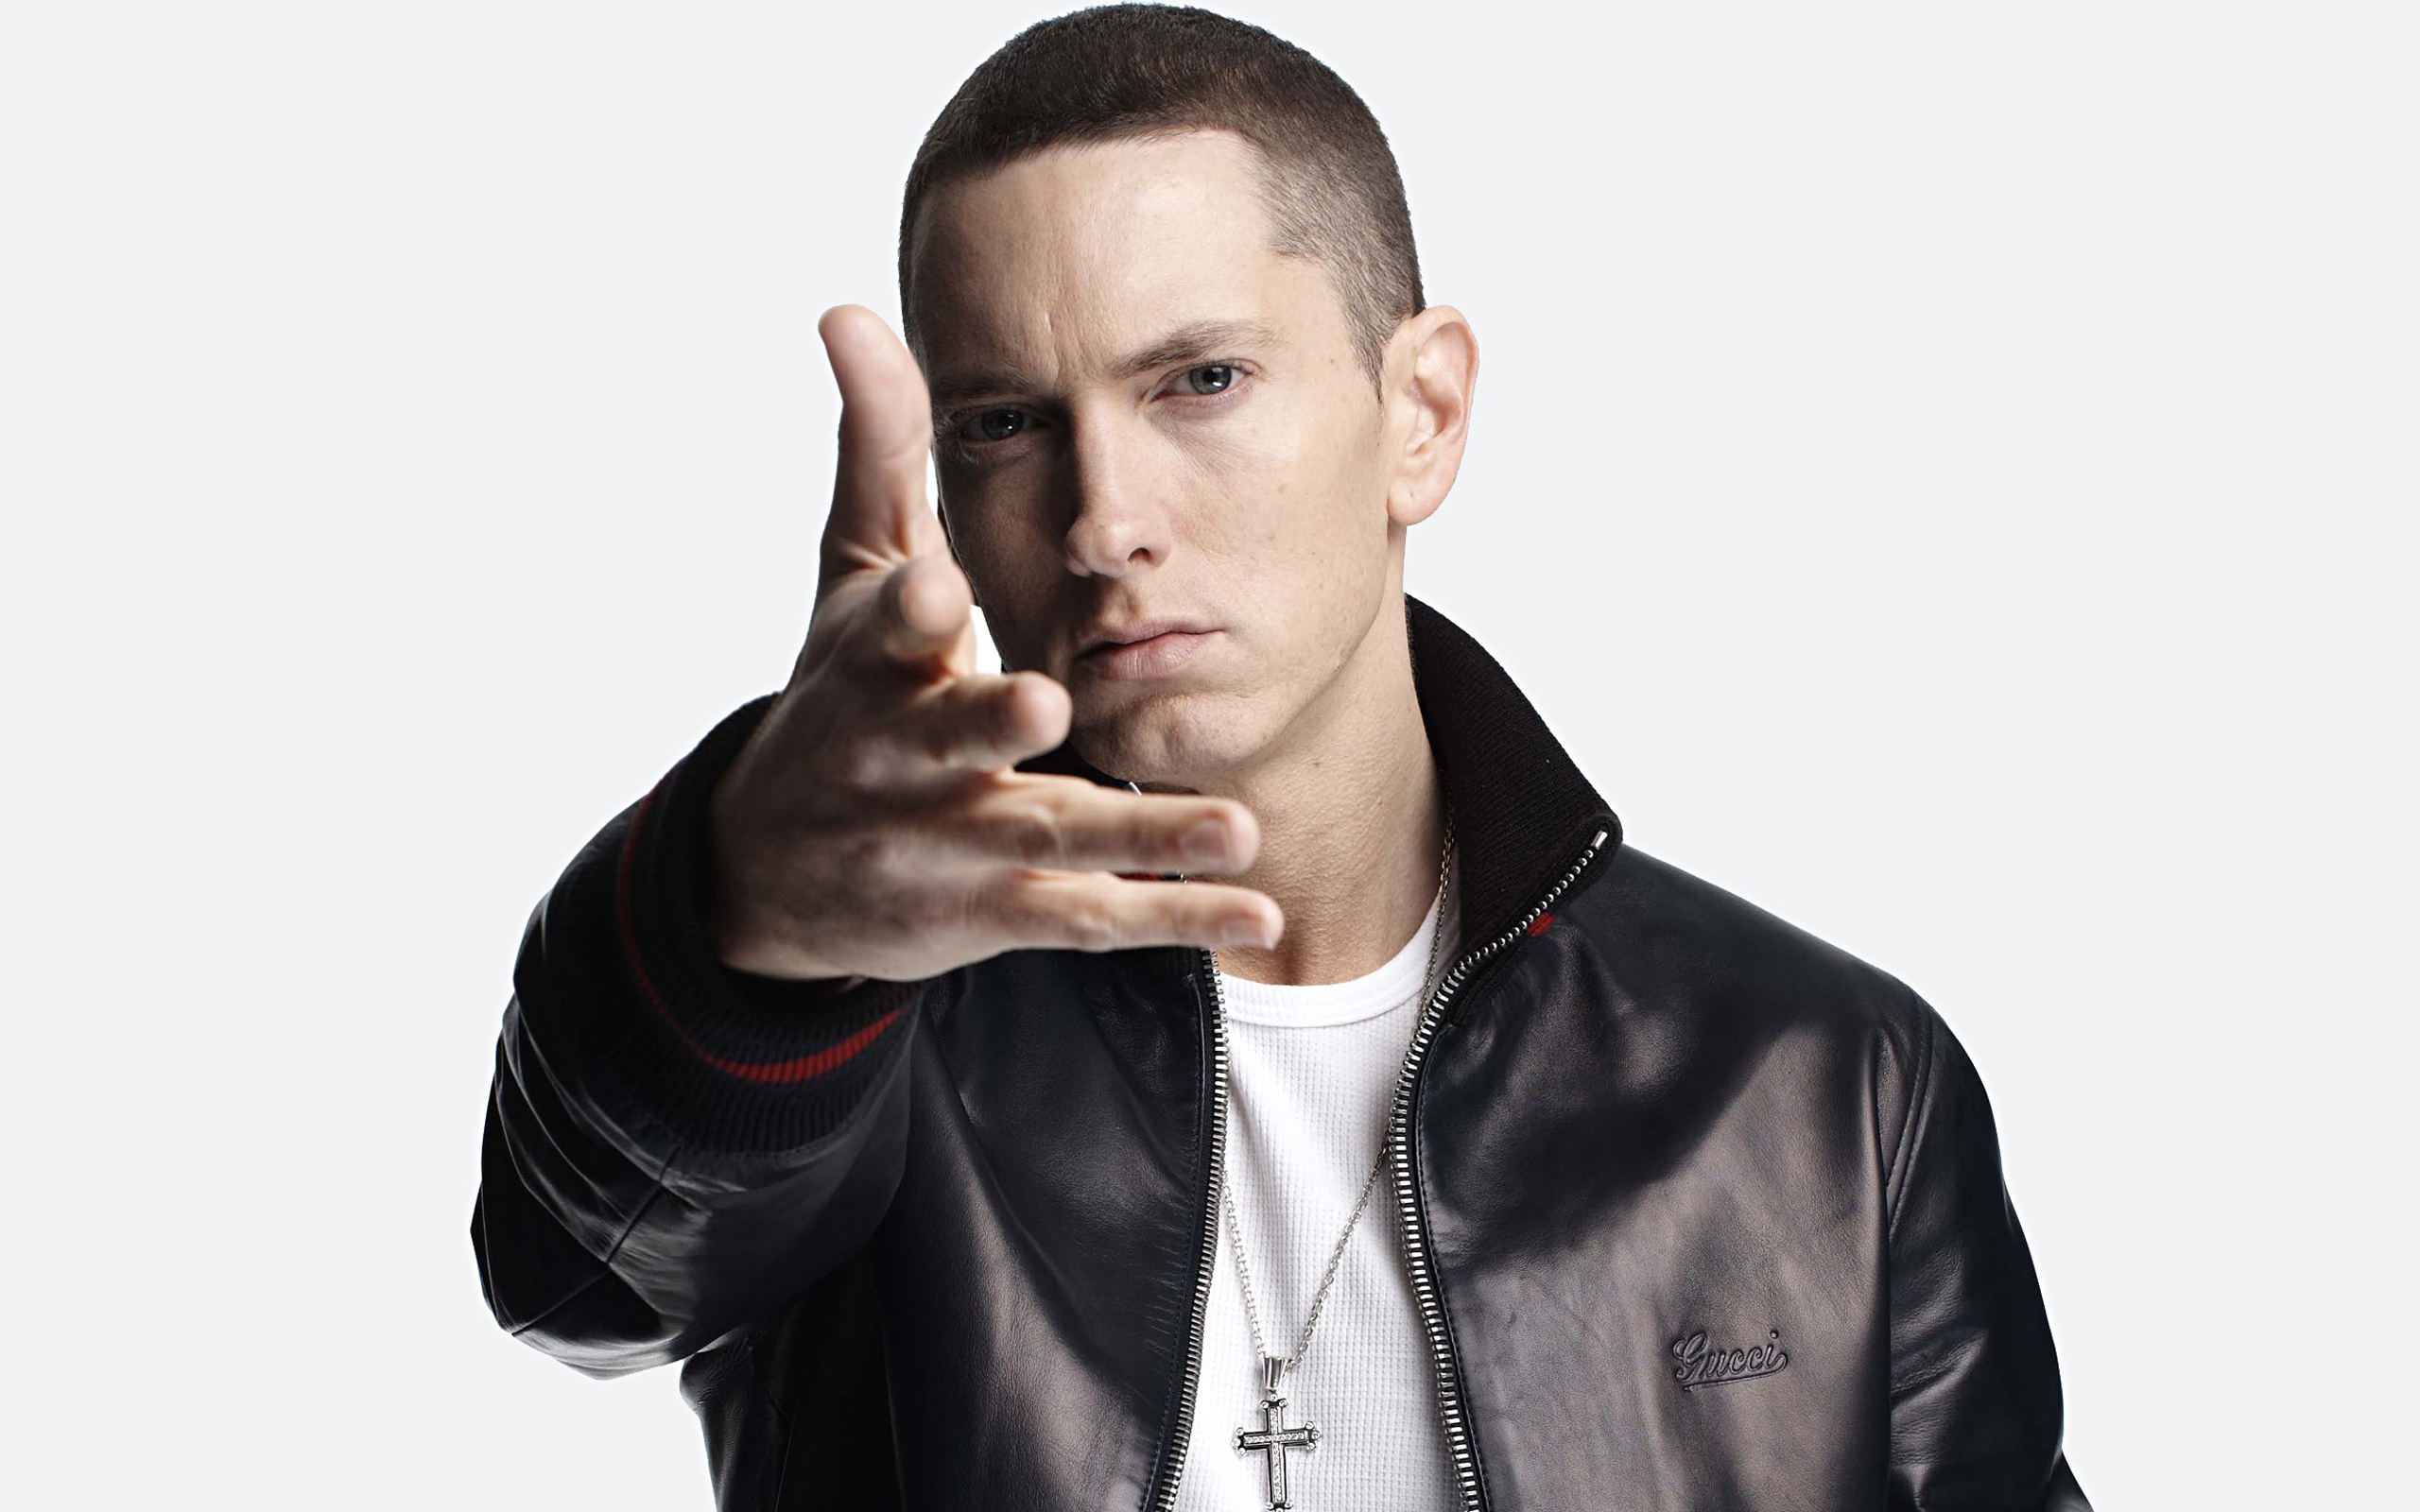 Eminem K Wallpapers For Your Desktop Or Mobile Screen Free And Easy To Download